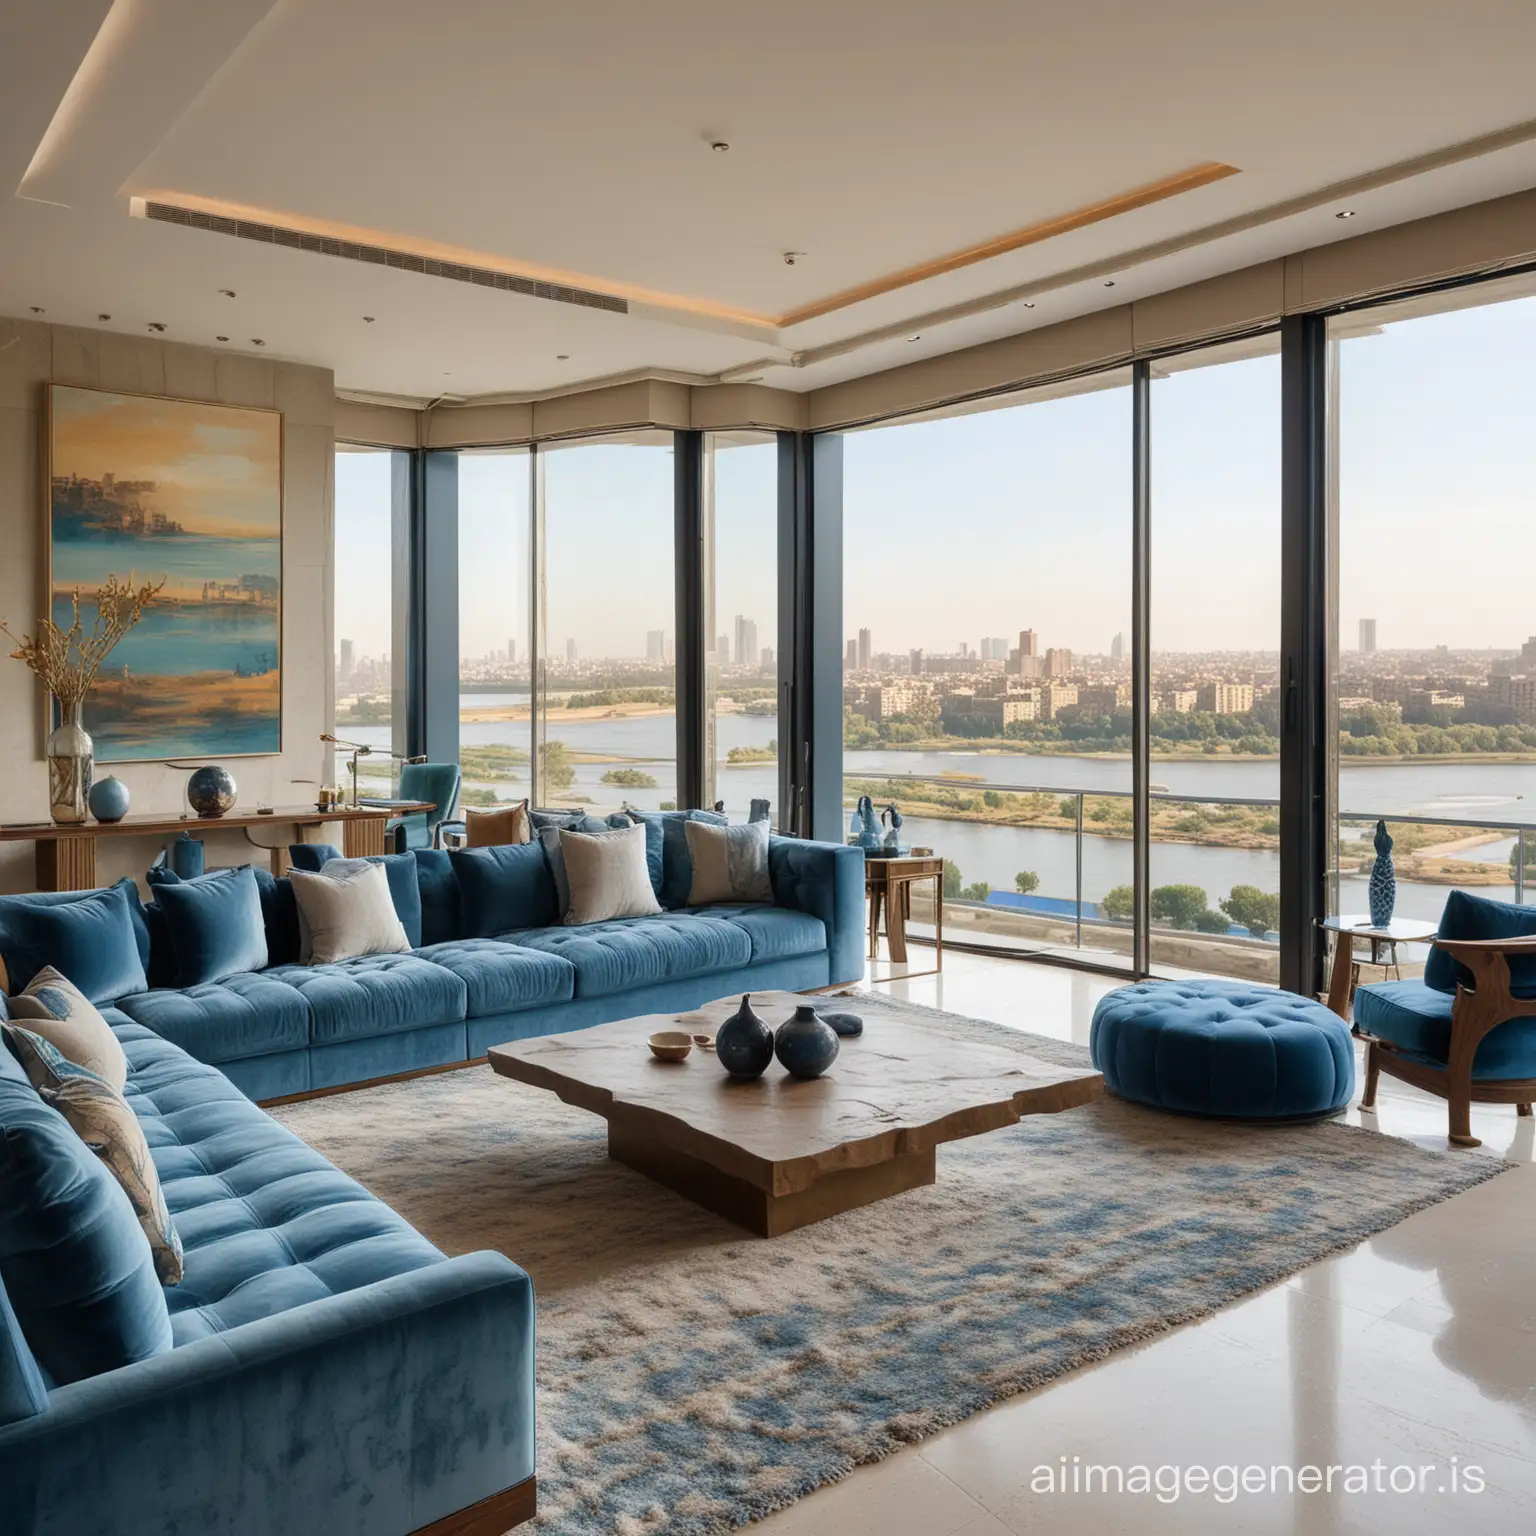 Luxurious-Nile-RiverView-Apartment-with-Earthy-and-Blue-Tones